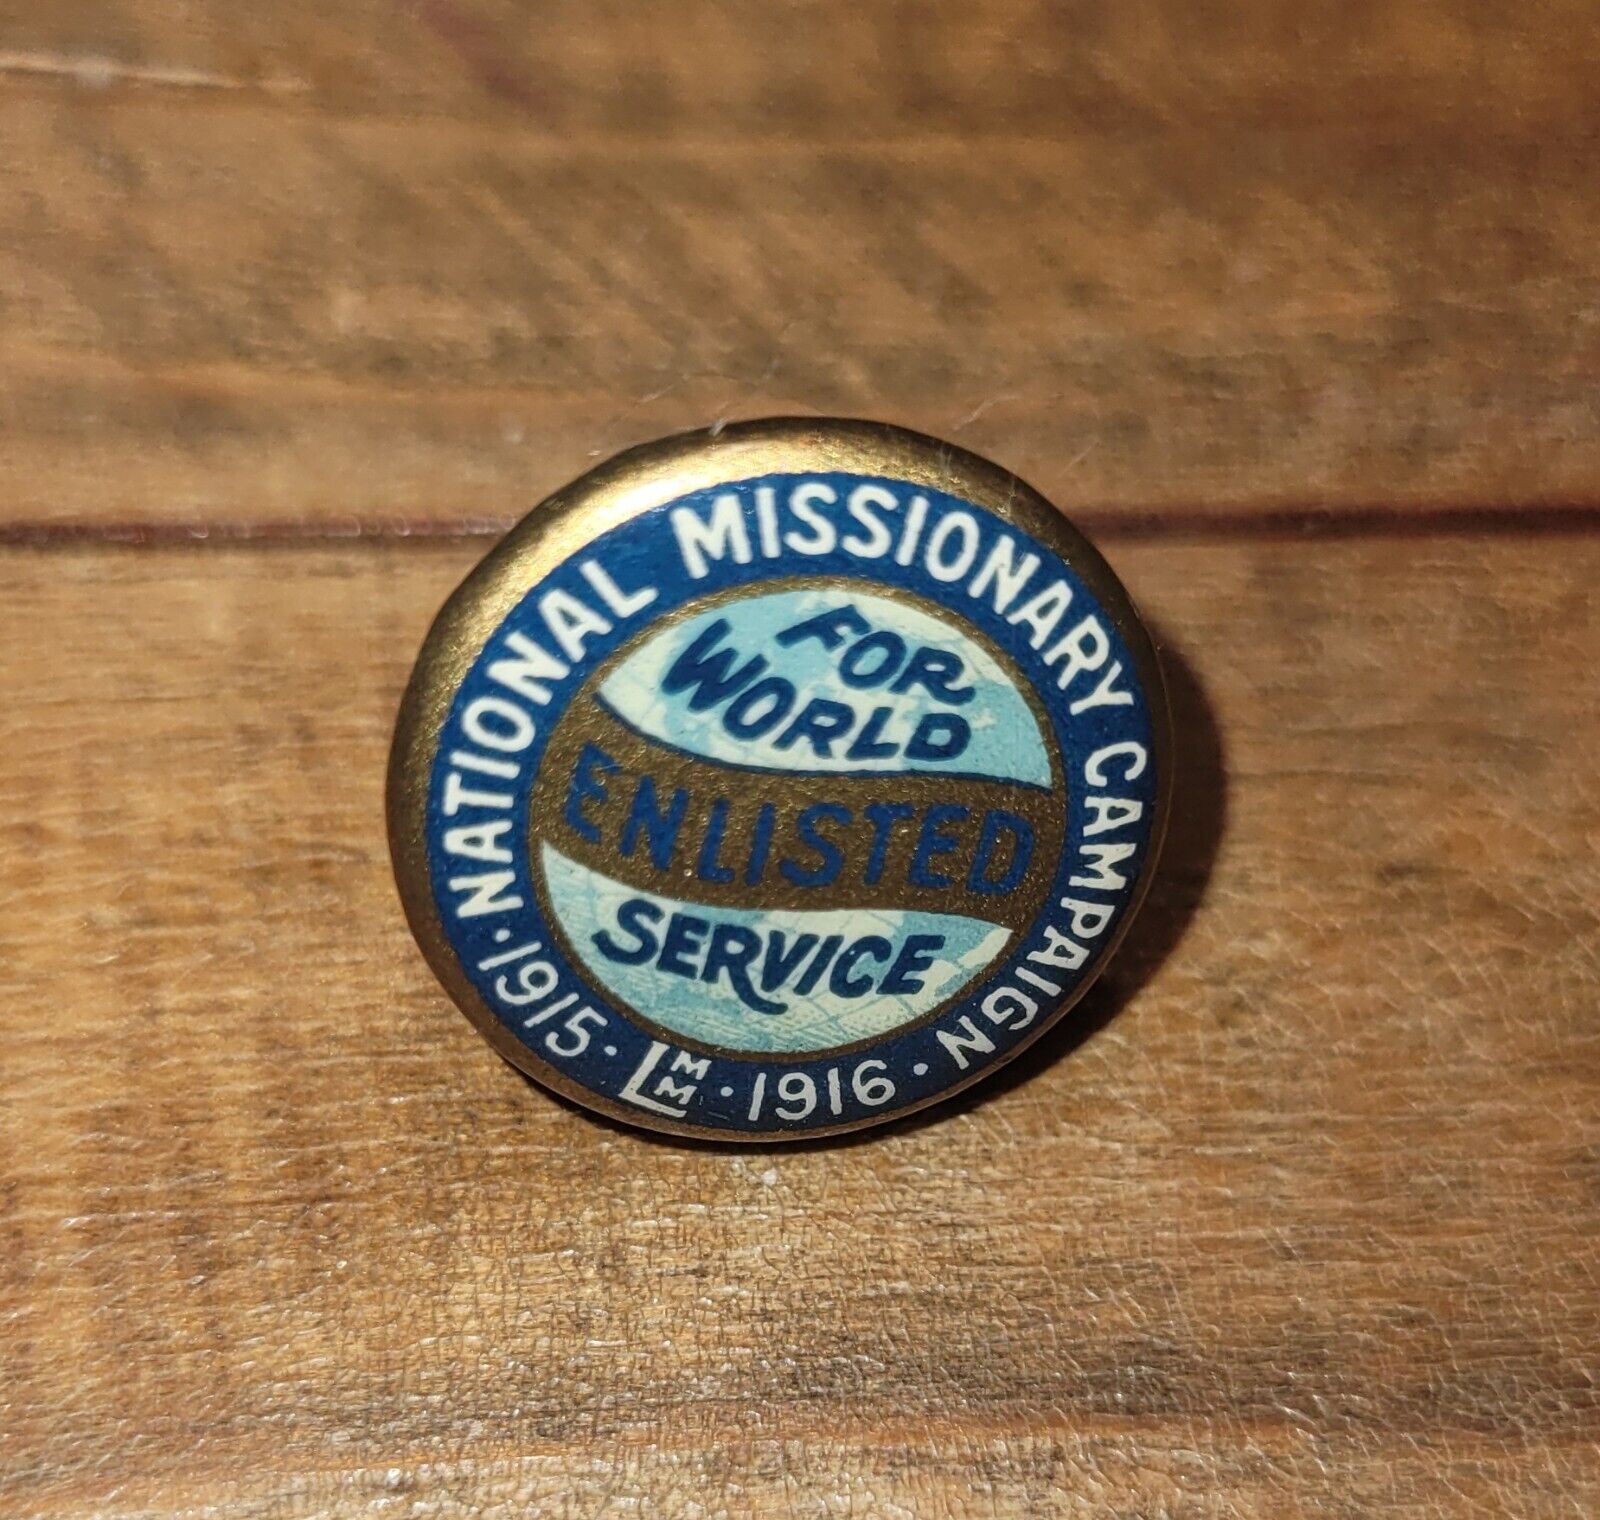 National Missionary Campaign for World Enlisted Service 1915 - 1916 pin